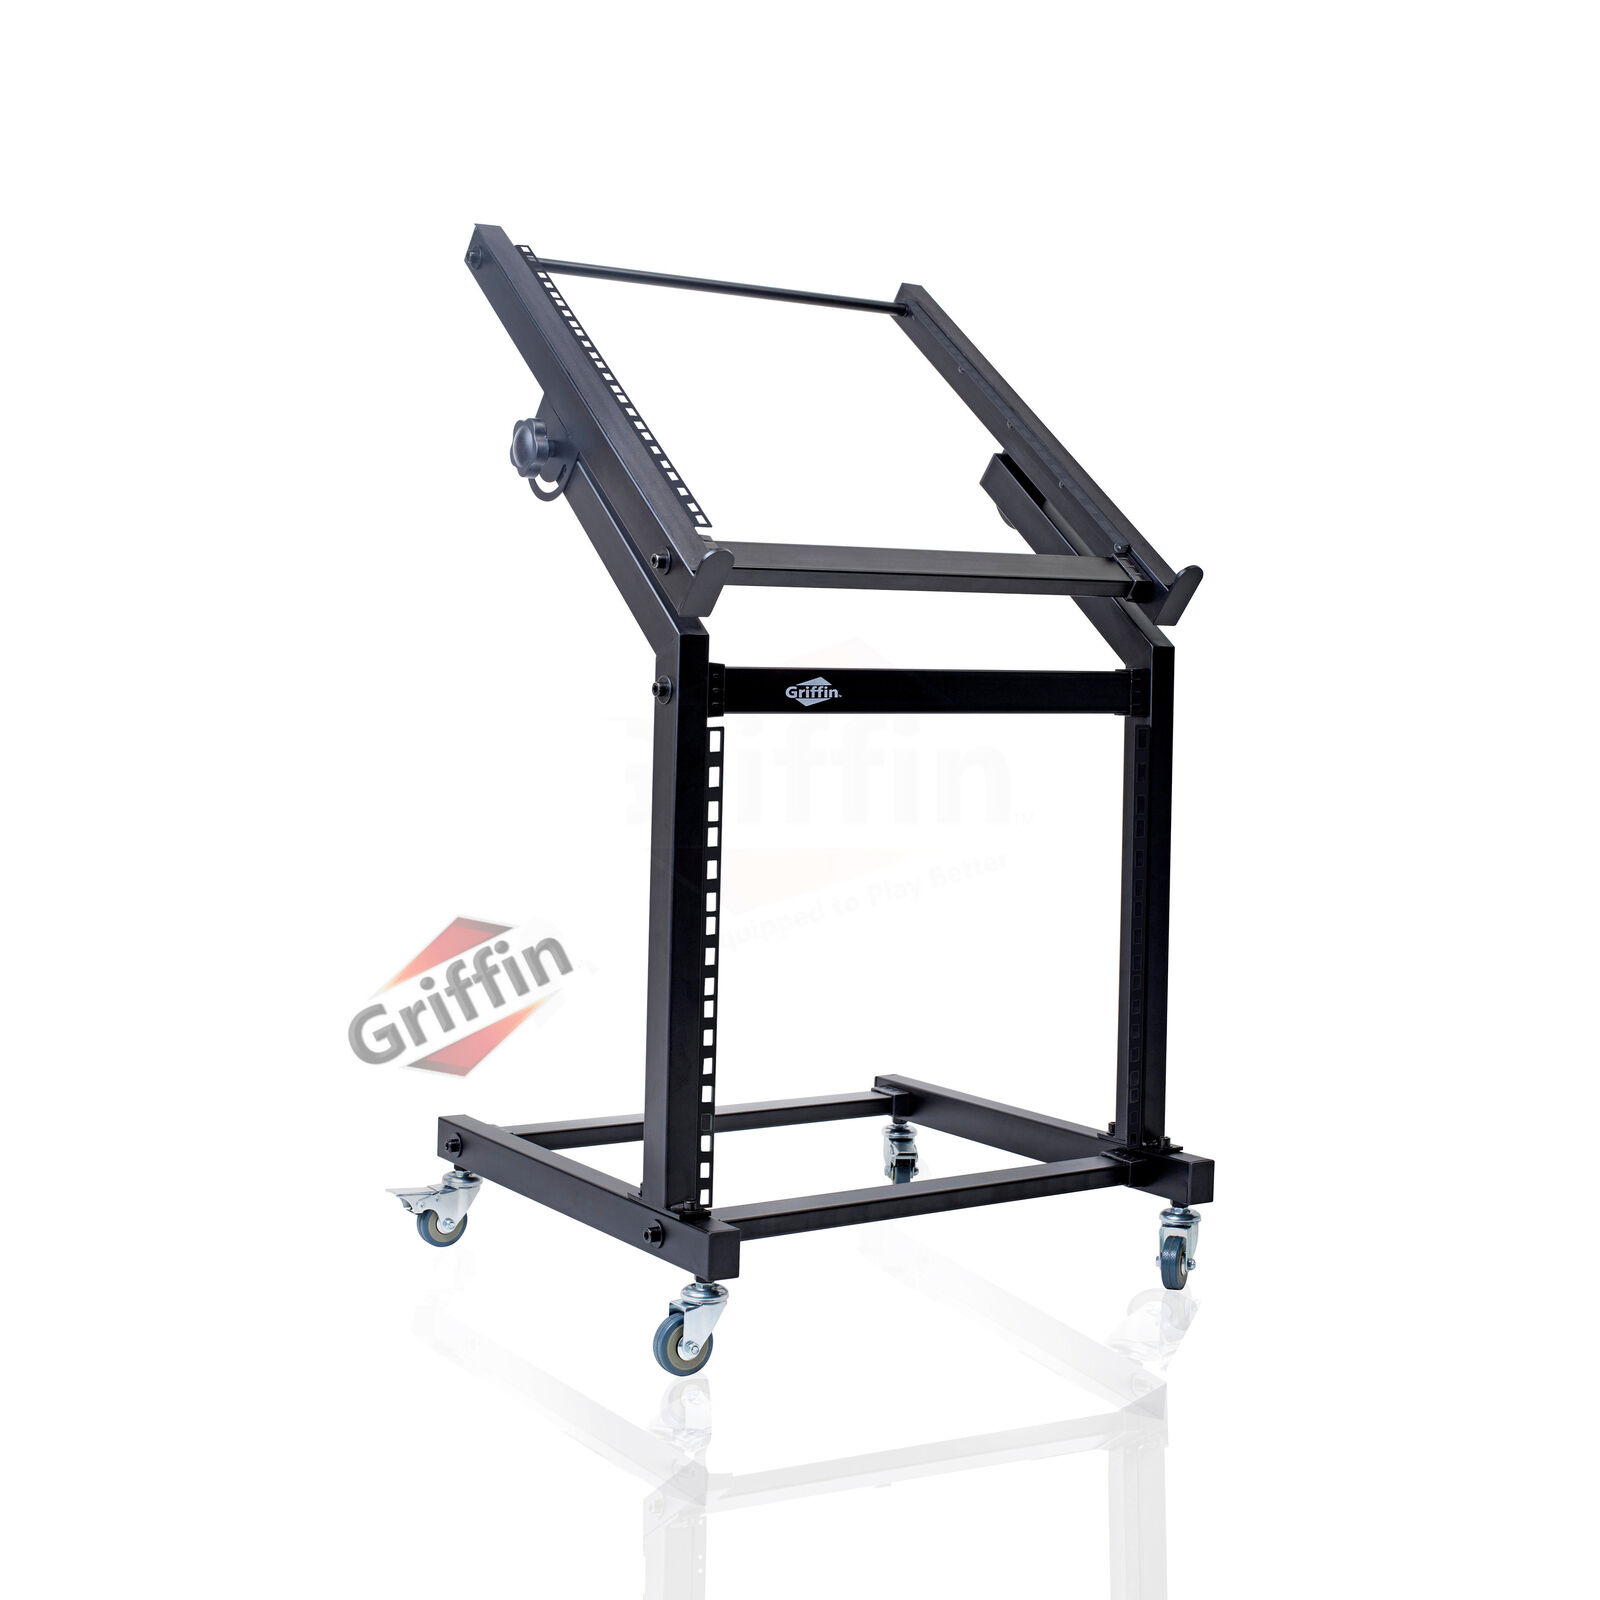 GRIFFIN Rack Mount Stand  Music Studio Recording Mixer Cart Rail Gear Holder